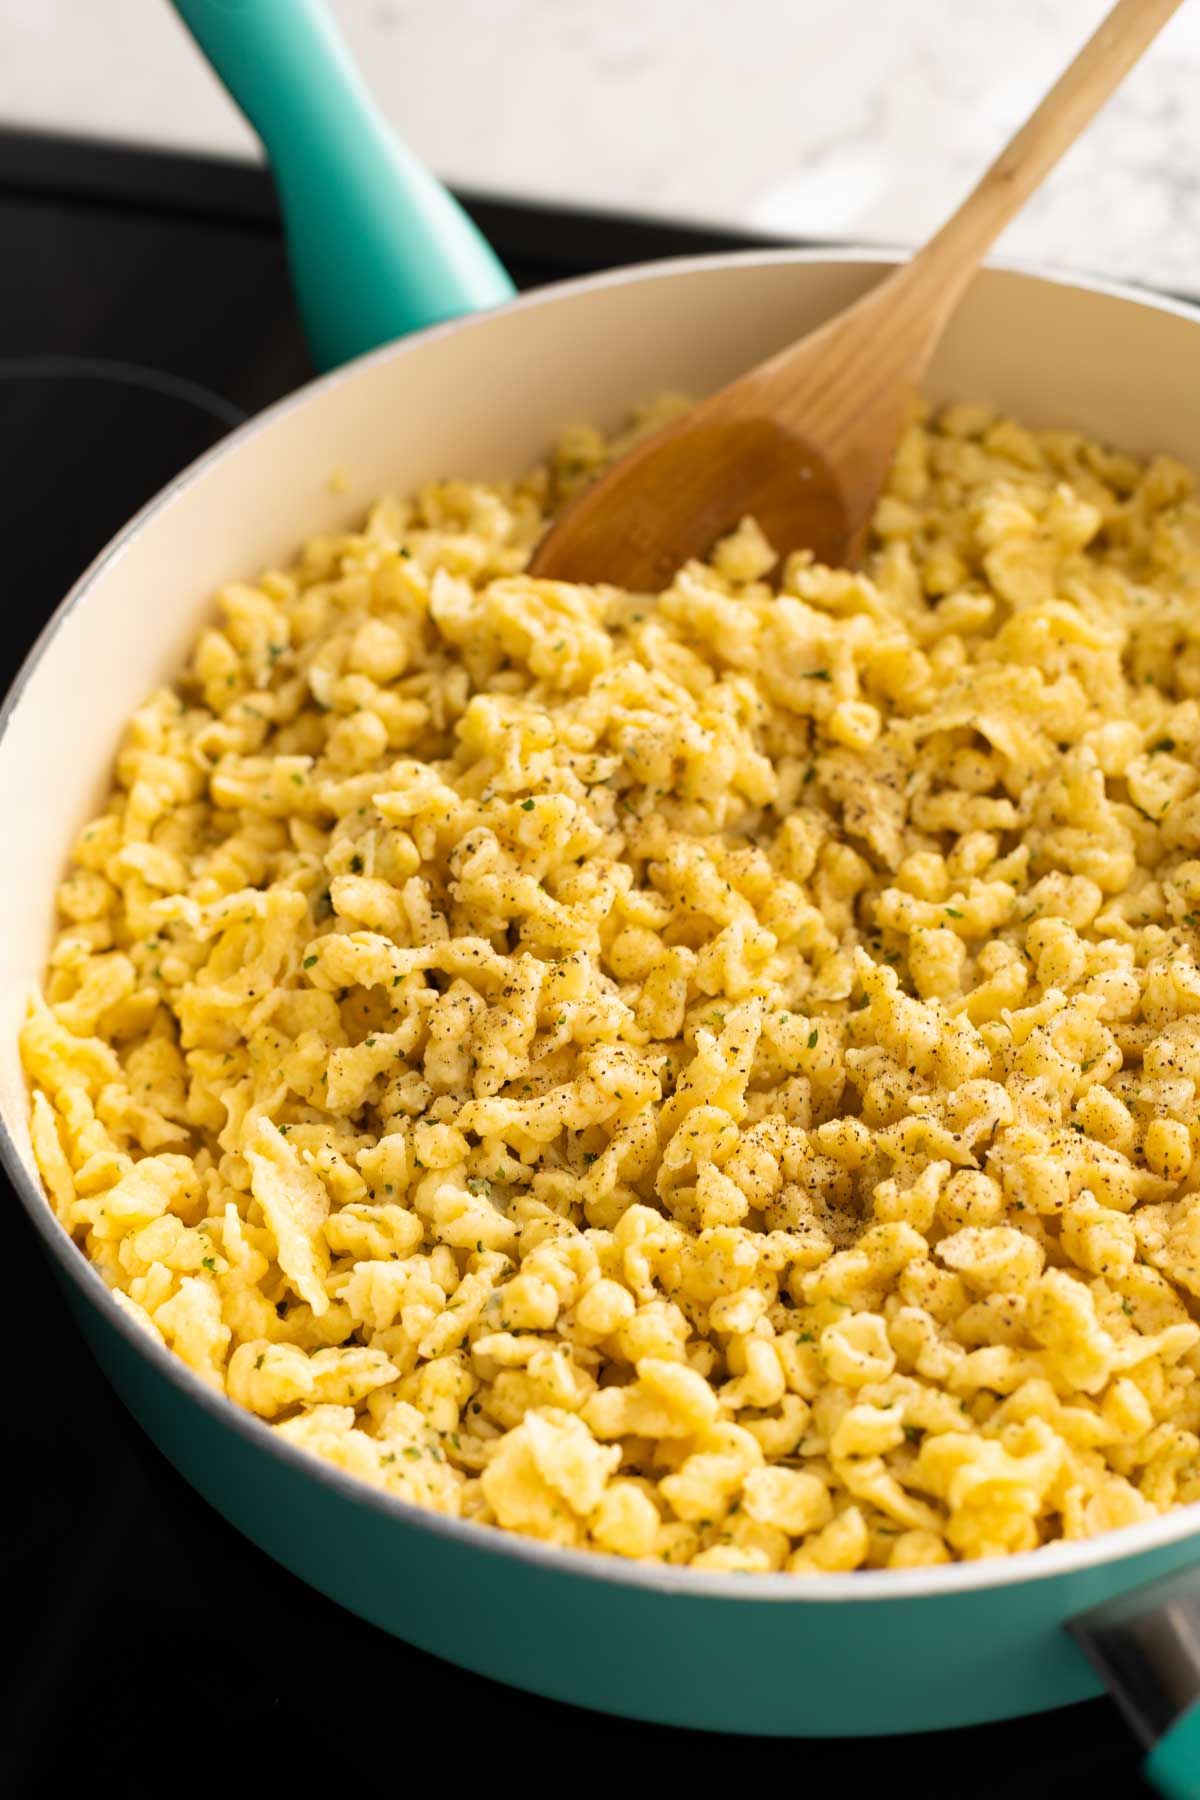 The spaetzle have been browned in melted butter in a large skillet.